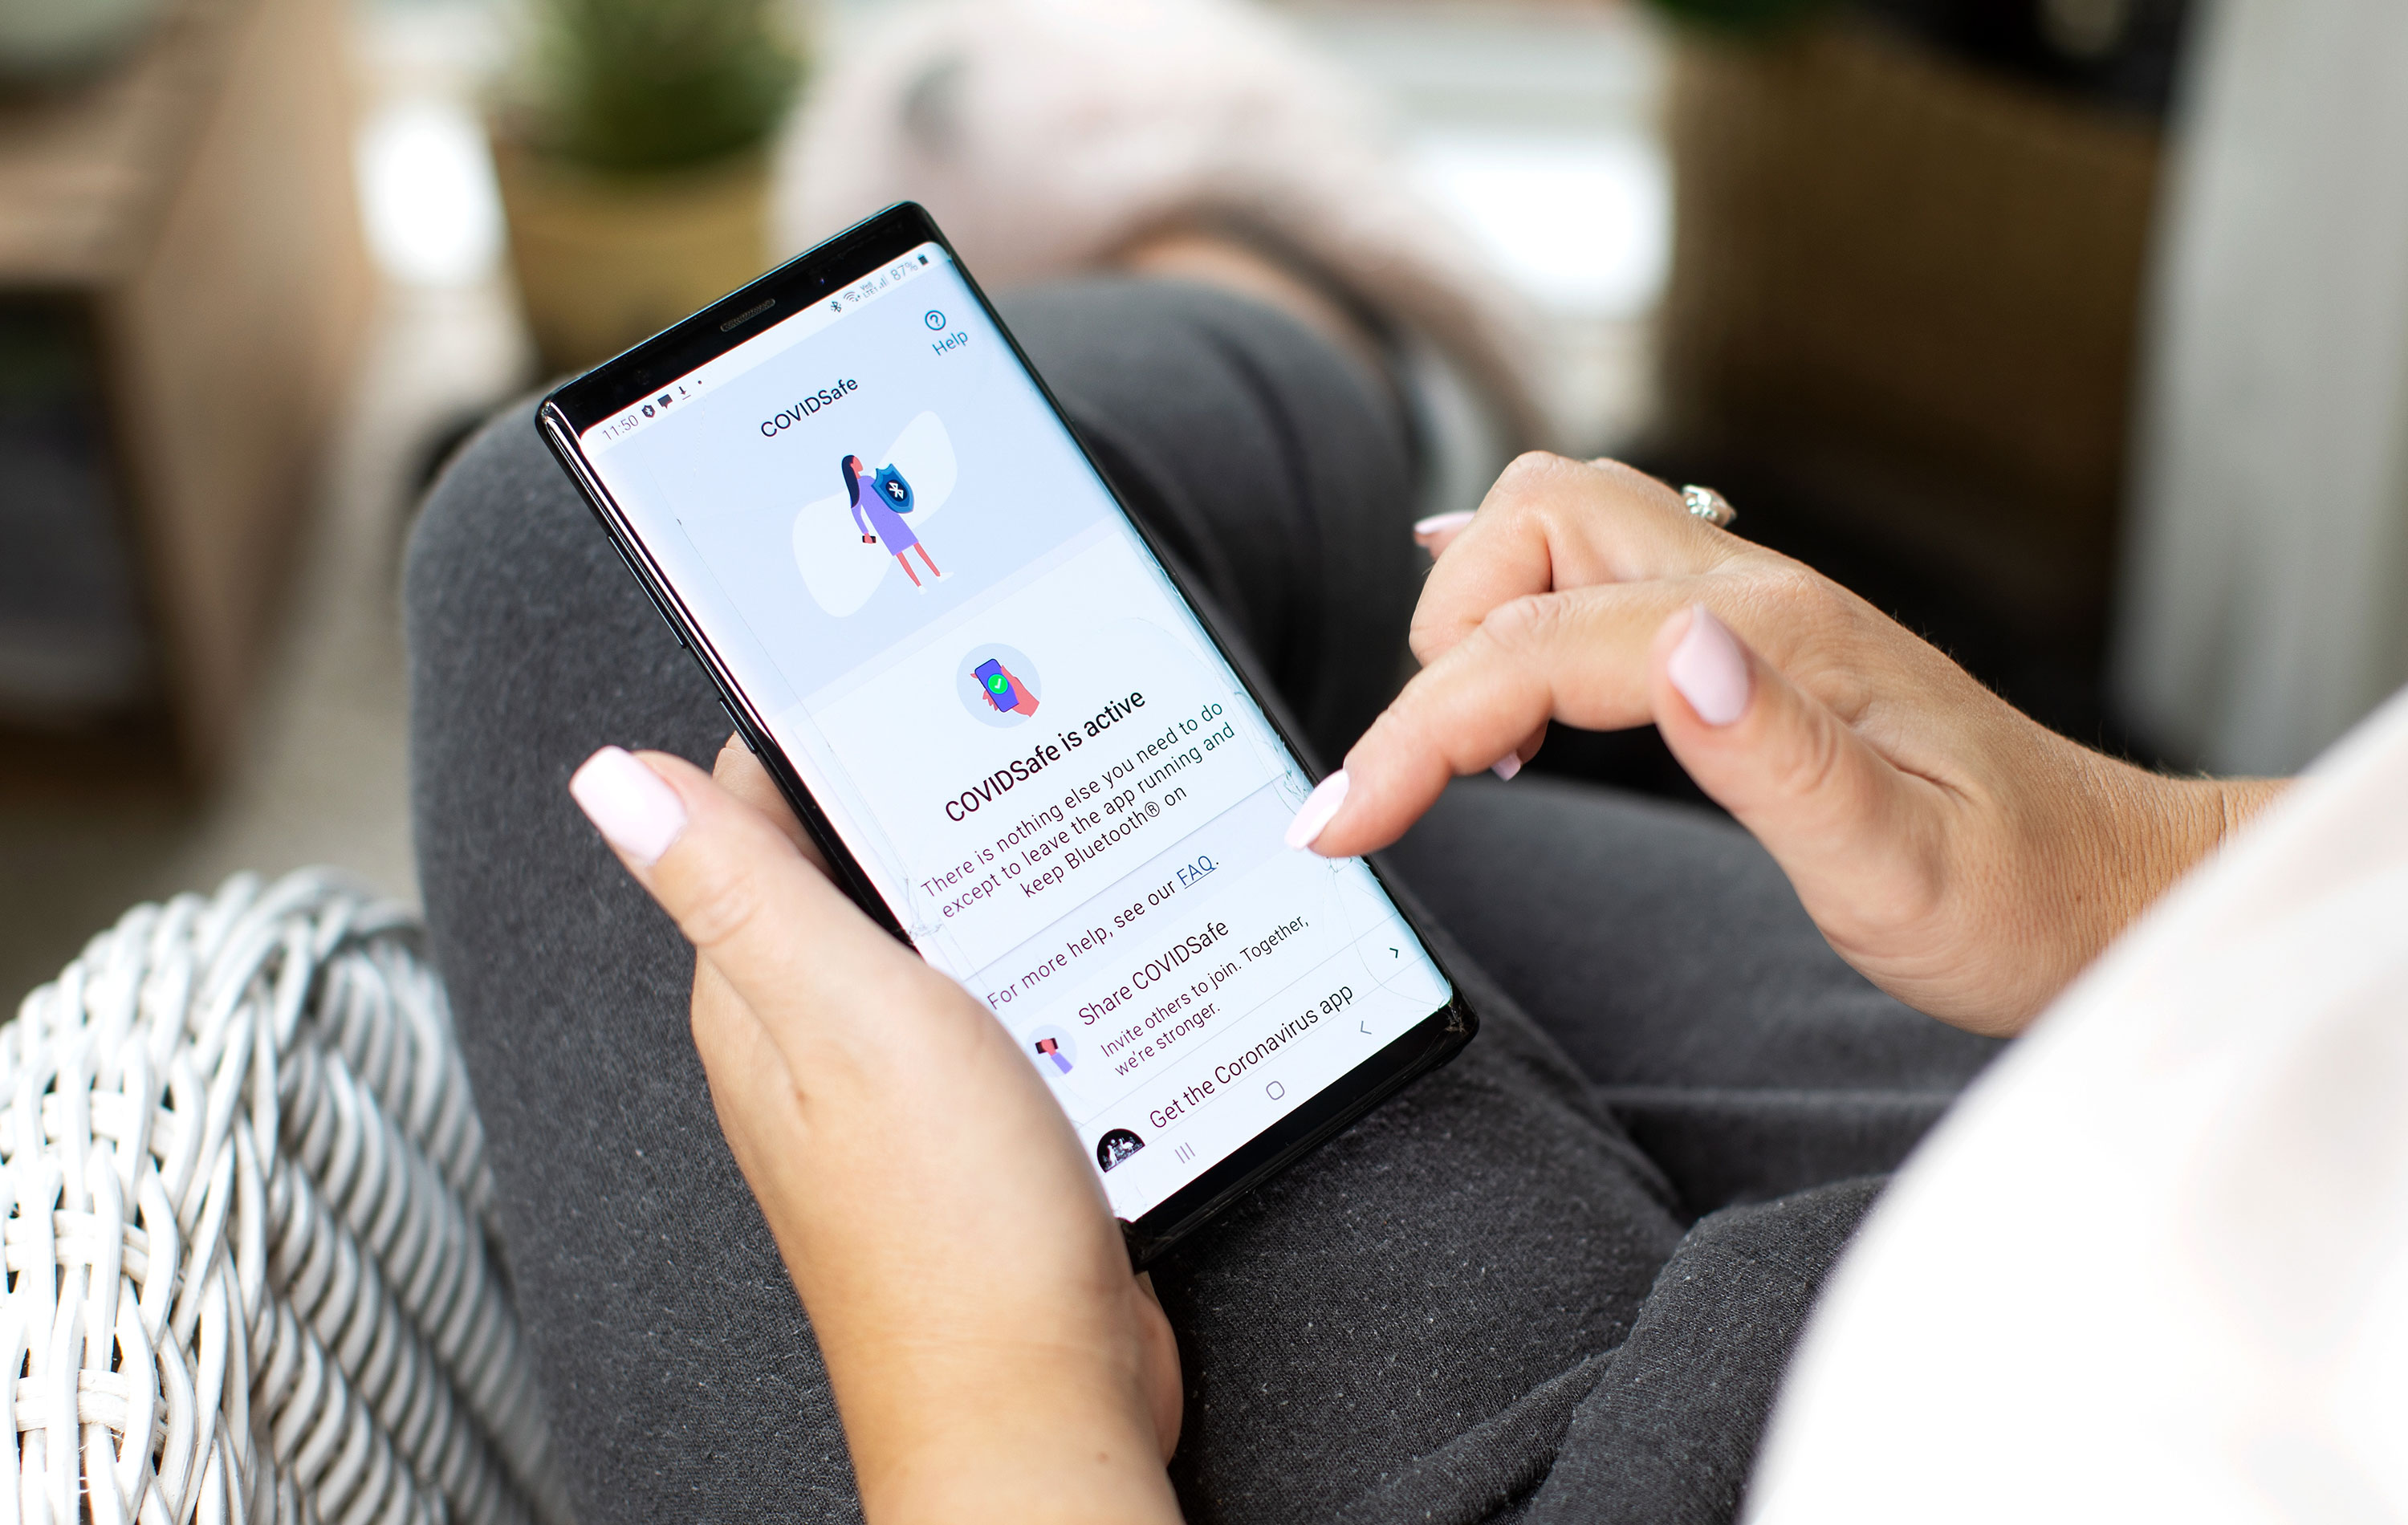 The Australian government coronavirus tracking app 'COVIDSafe' is designed to help health authorities trace people who may have come into contact with someone who has Covid-19.